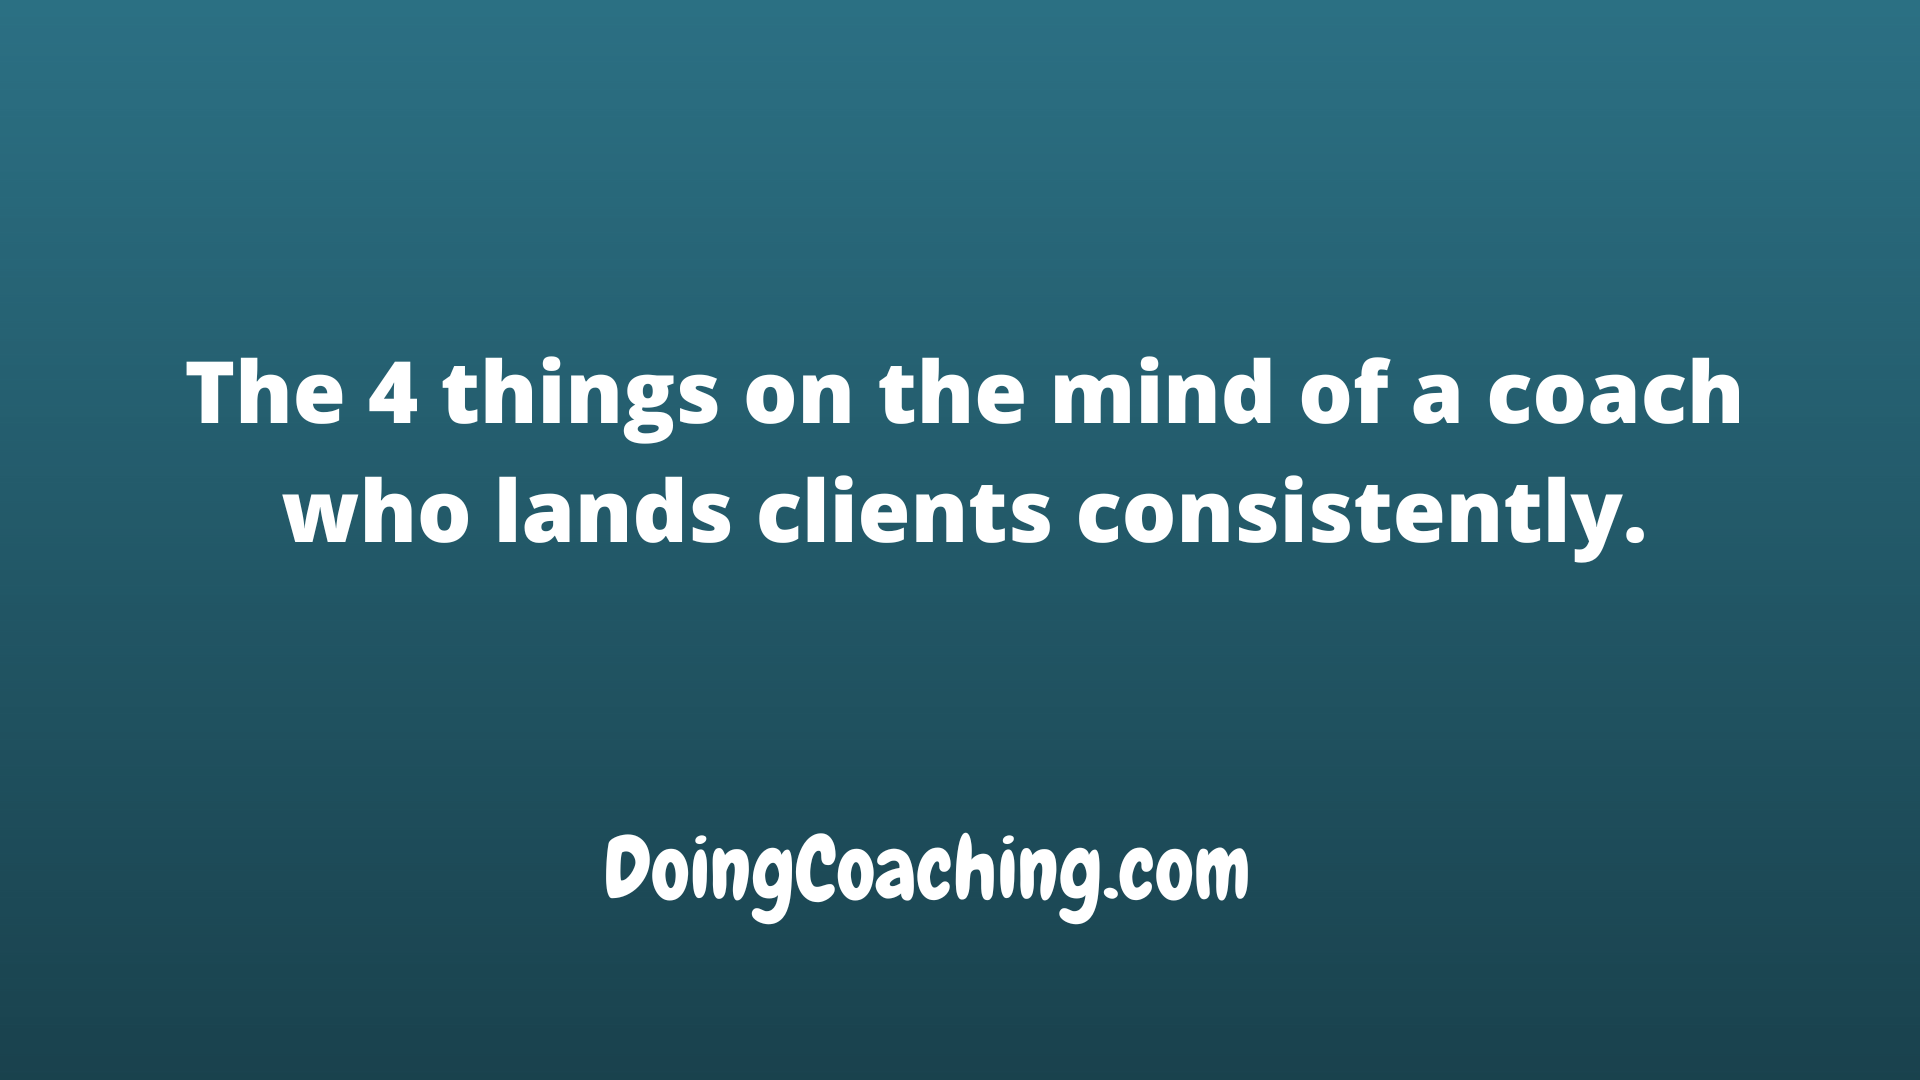 4 things on the mind of a coach who lands clients consistently pic